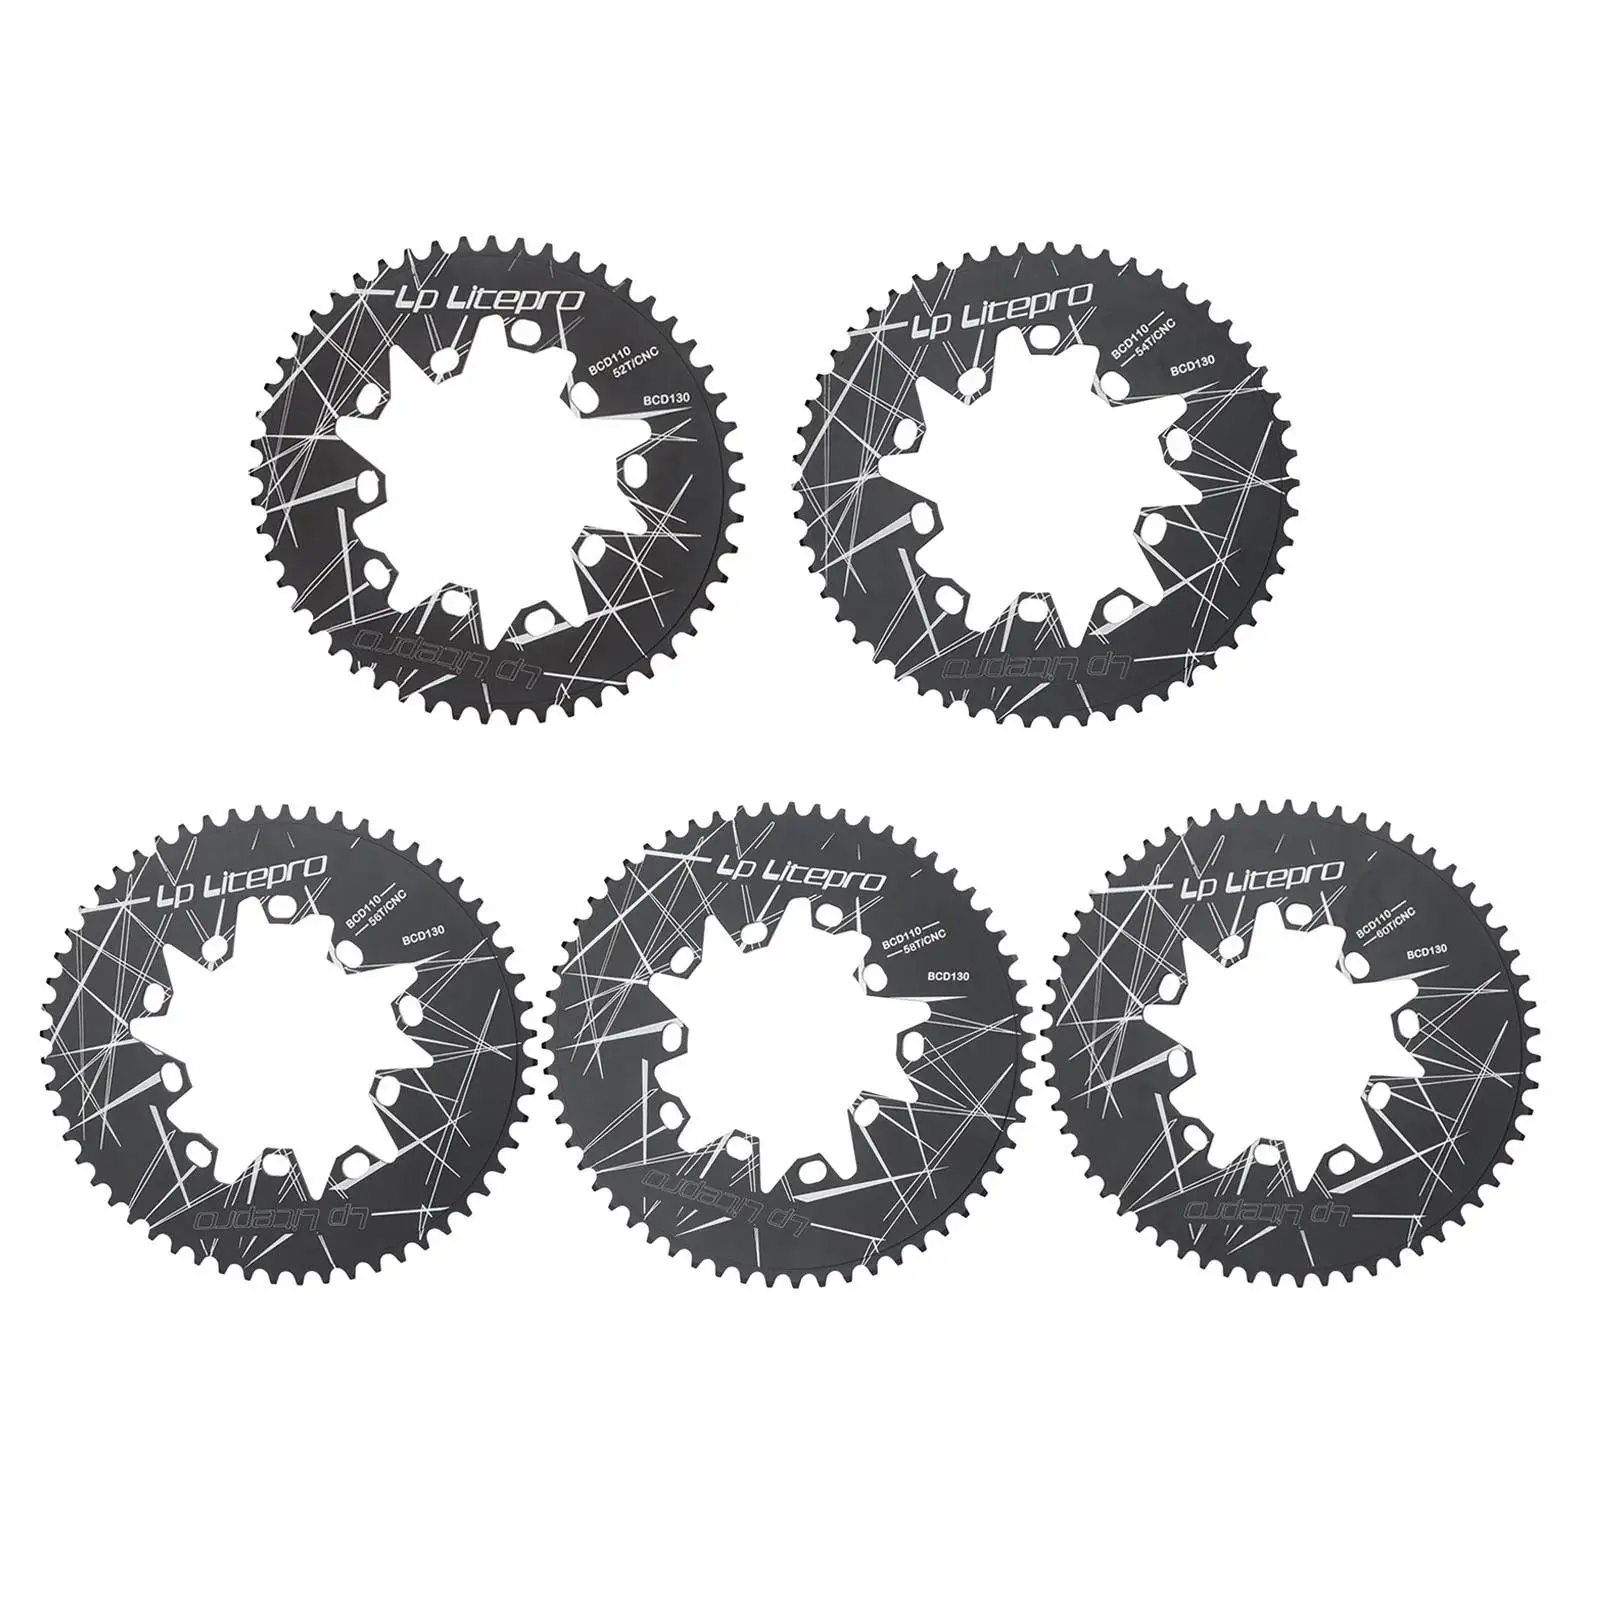 Bike Chainwheel 52T/54T/56T/58T/60T Ultralight 7-10 Speeds 130BCD Road Bicycle Chainring Chain Wheel Chain Ring Replacement Part